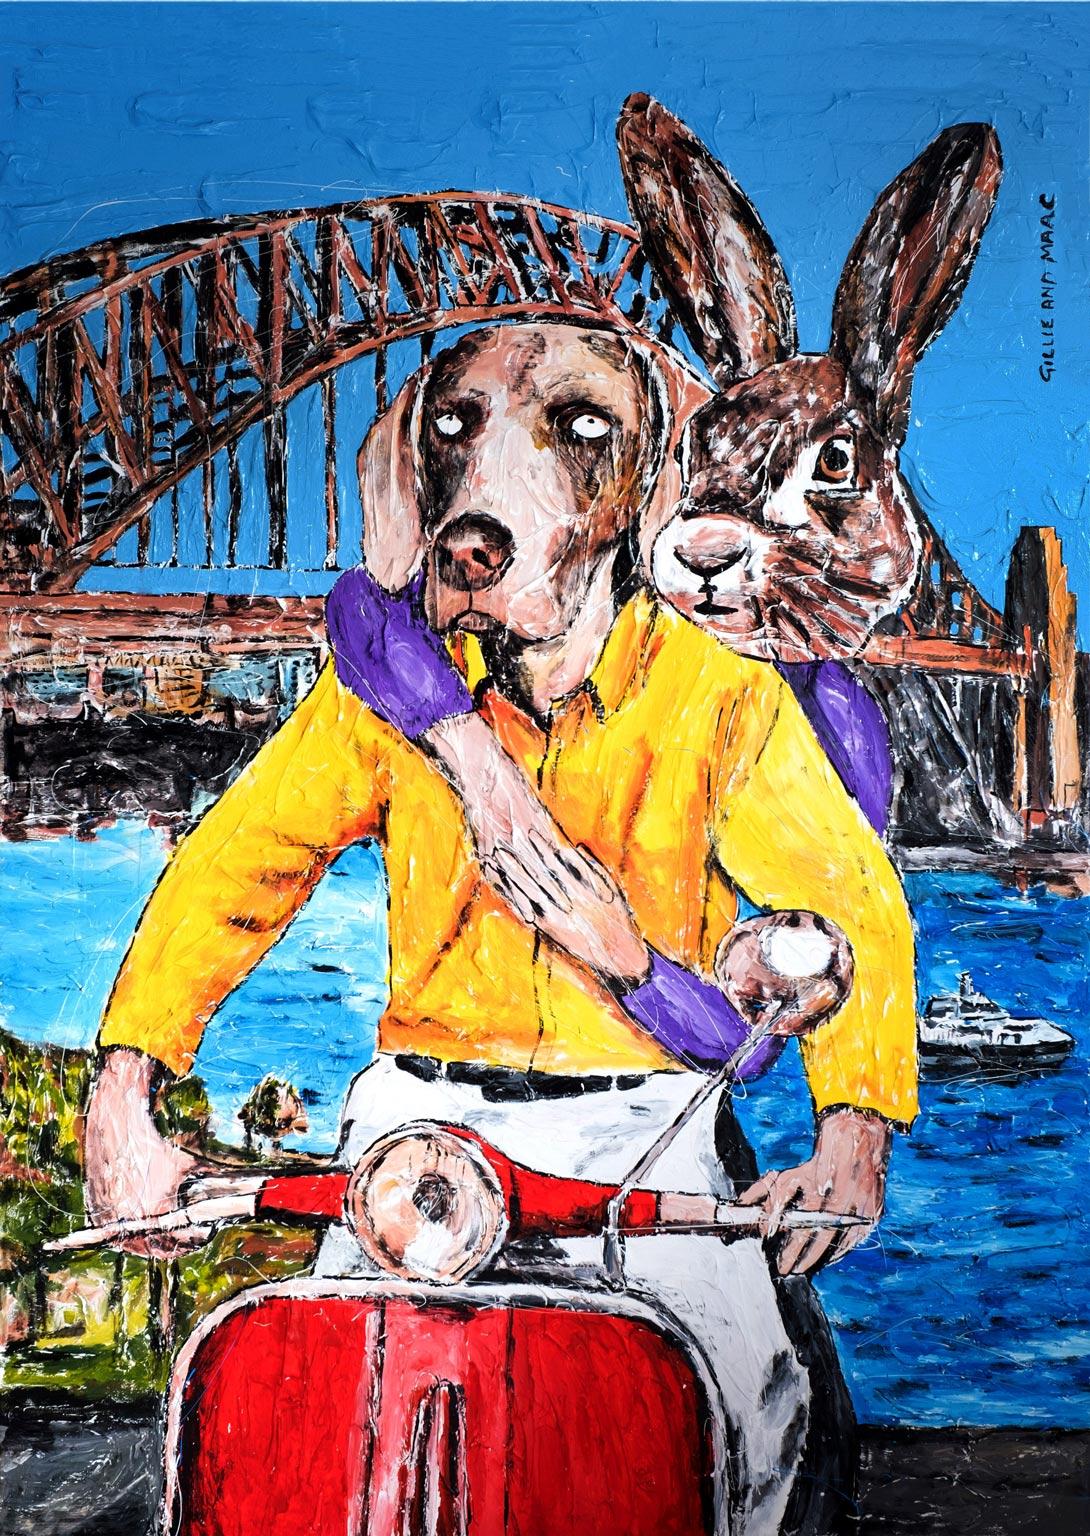 Gillie and Marc Schattner Figurative Print - Animal Print - Gillie and Marc - Art - Ltd Ed - Giclee - Excitement in Sydney